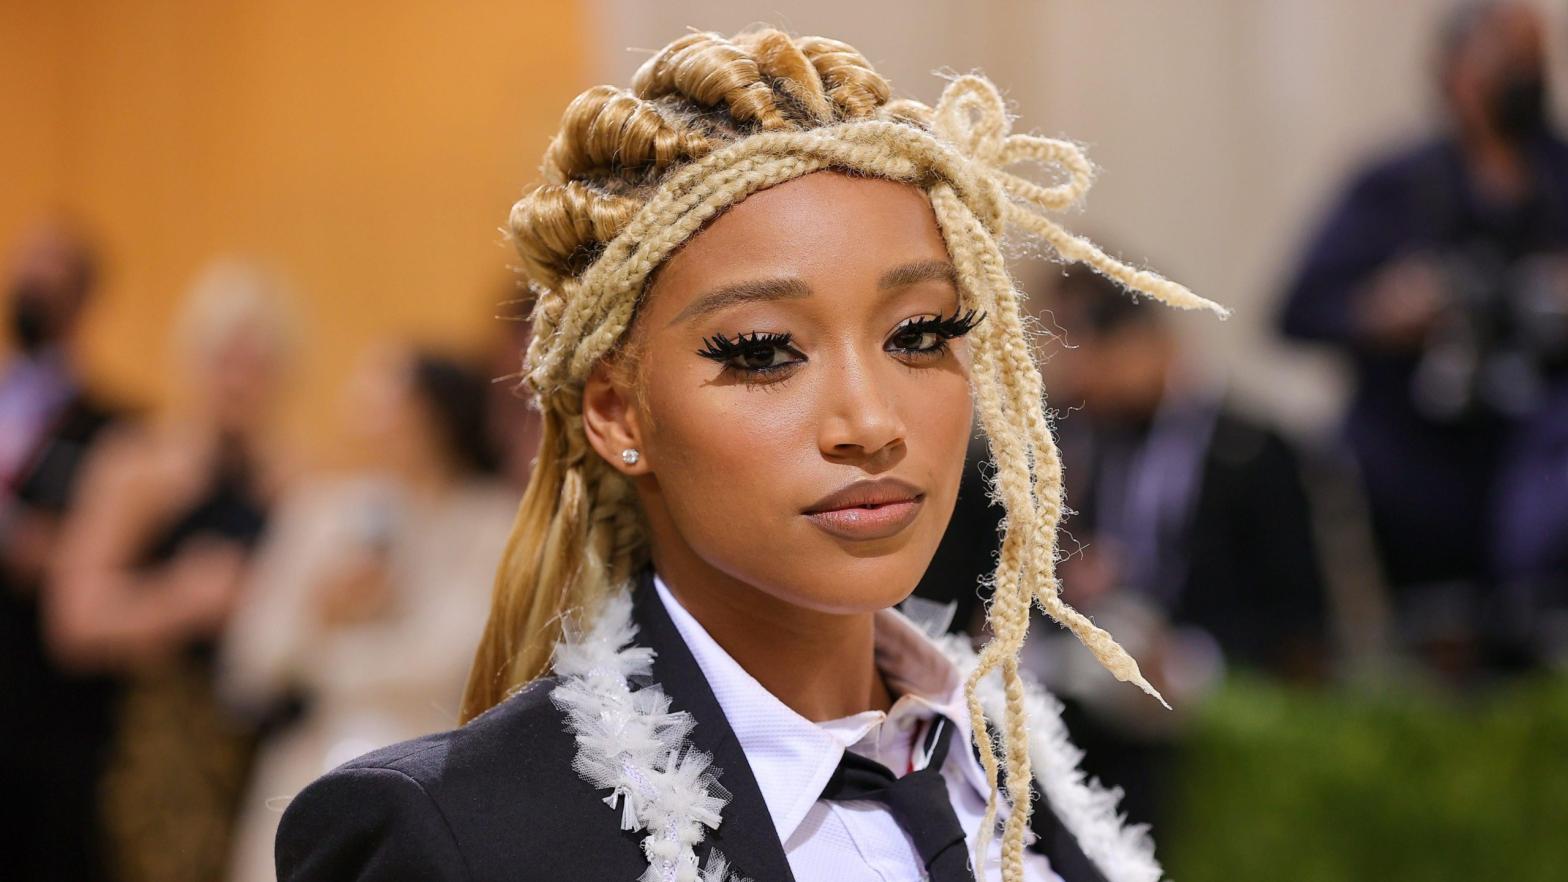 Amandla Stenberg, seen here at the 2021 Met Gala, is likely to be joining the Star Wars universe. (Photo: Theo Wargo, Getty Images)